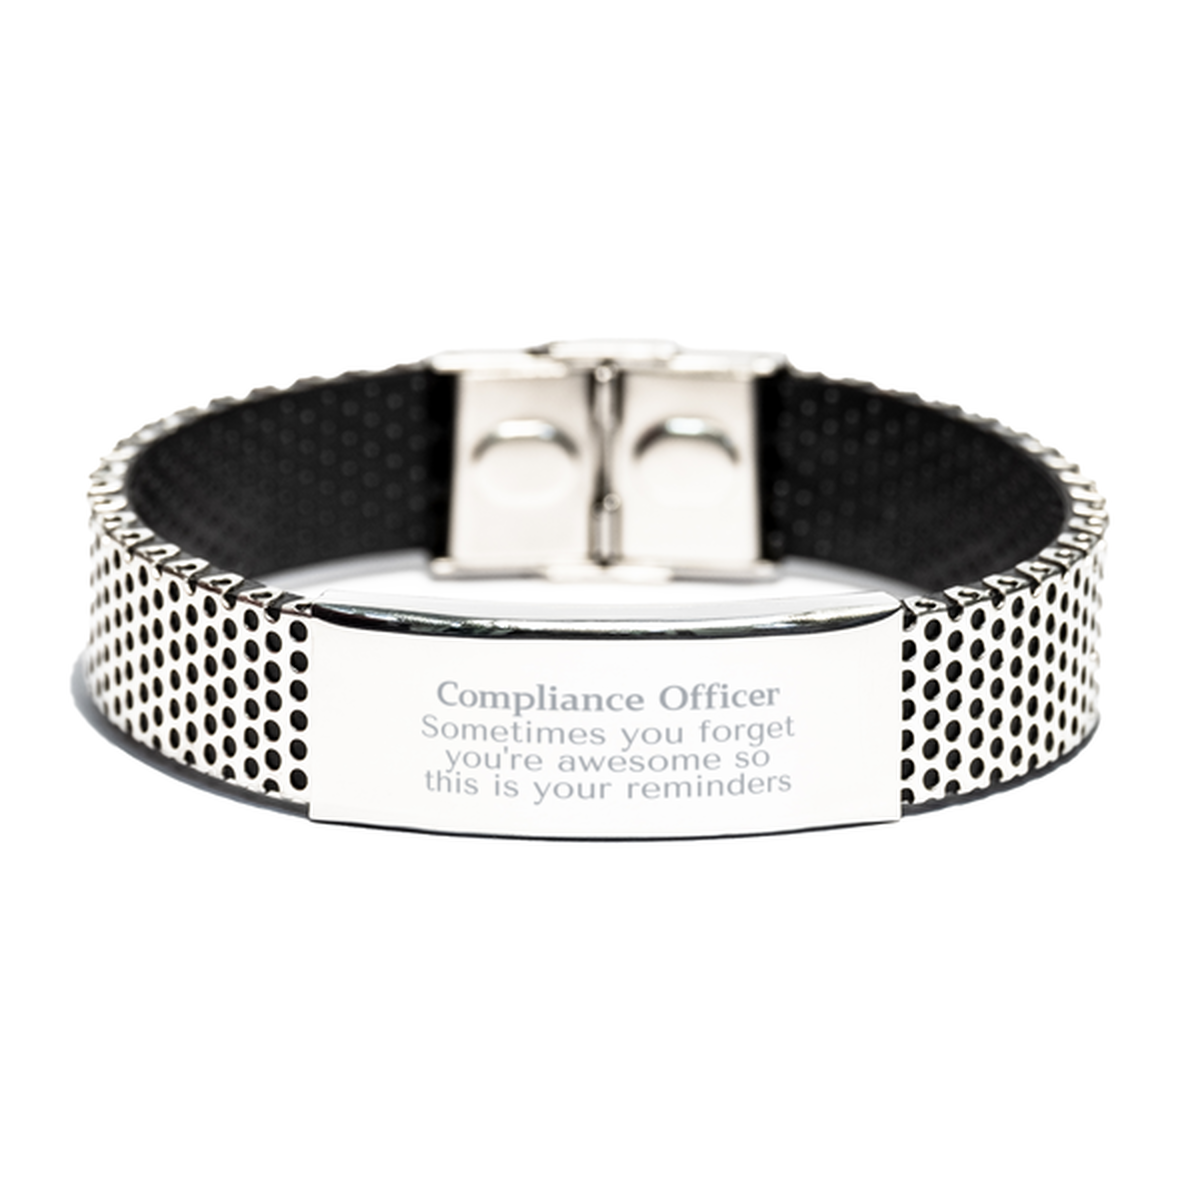 Sentimental Compliance Officer Stainless Steel Bracelet, Compliance Officer Sometimes you forget you're awesome so this is your reminders, Graduation Christmas Birthday Gifts for Compliance Officer, Men, Women, Coworkers